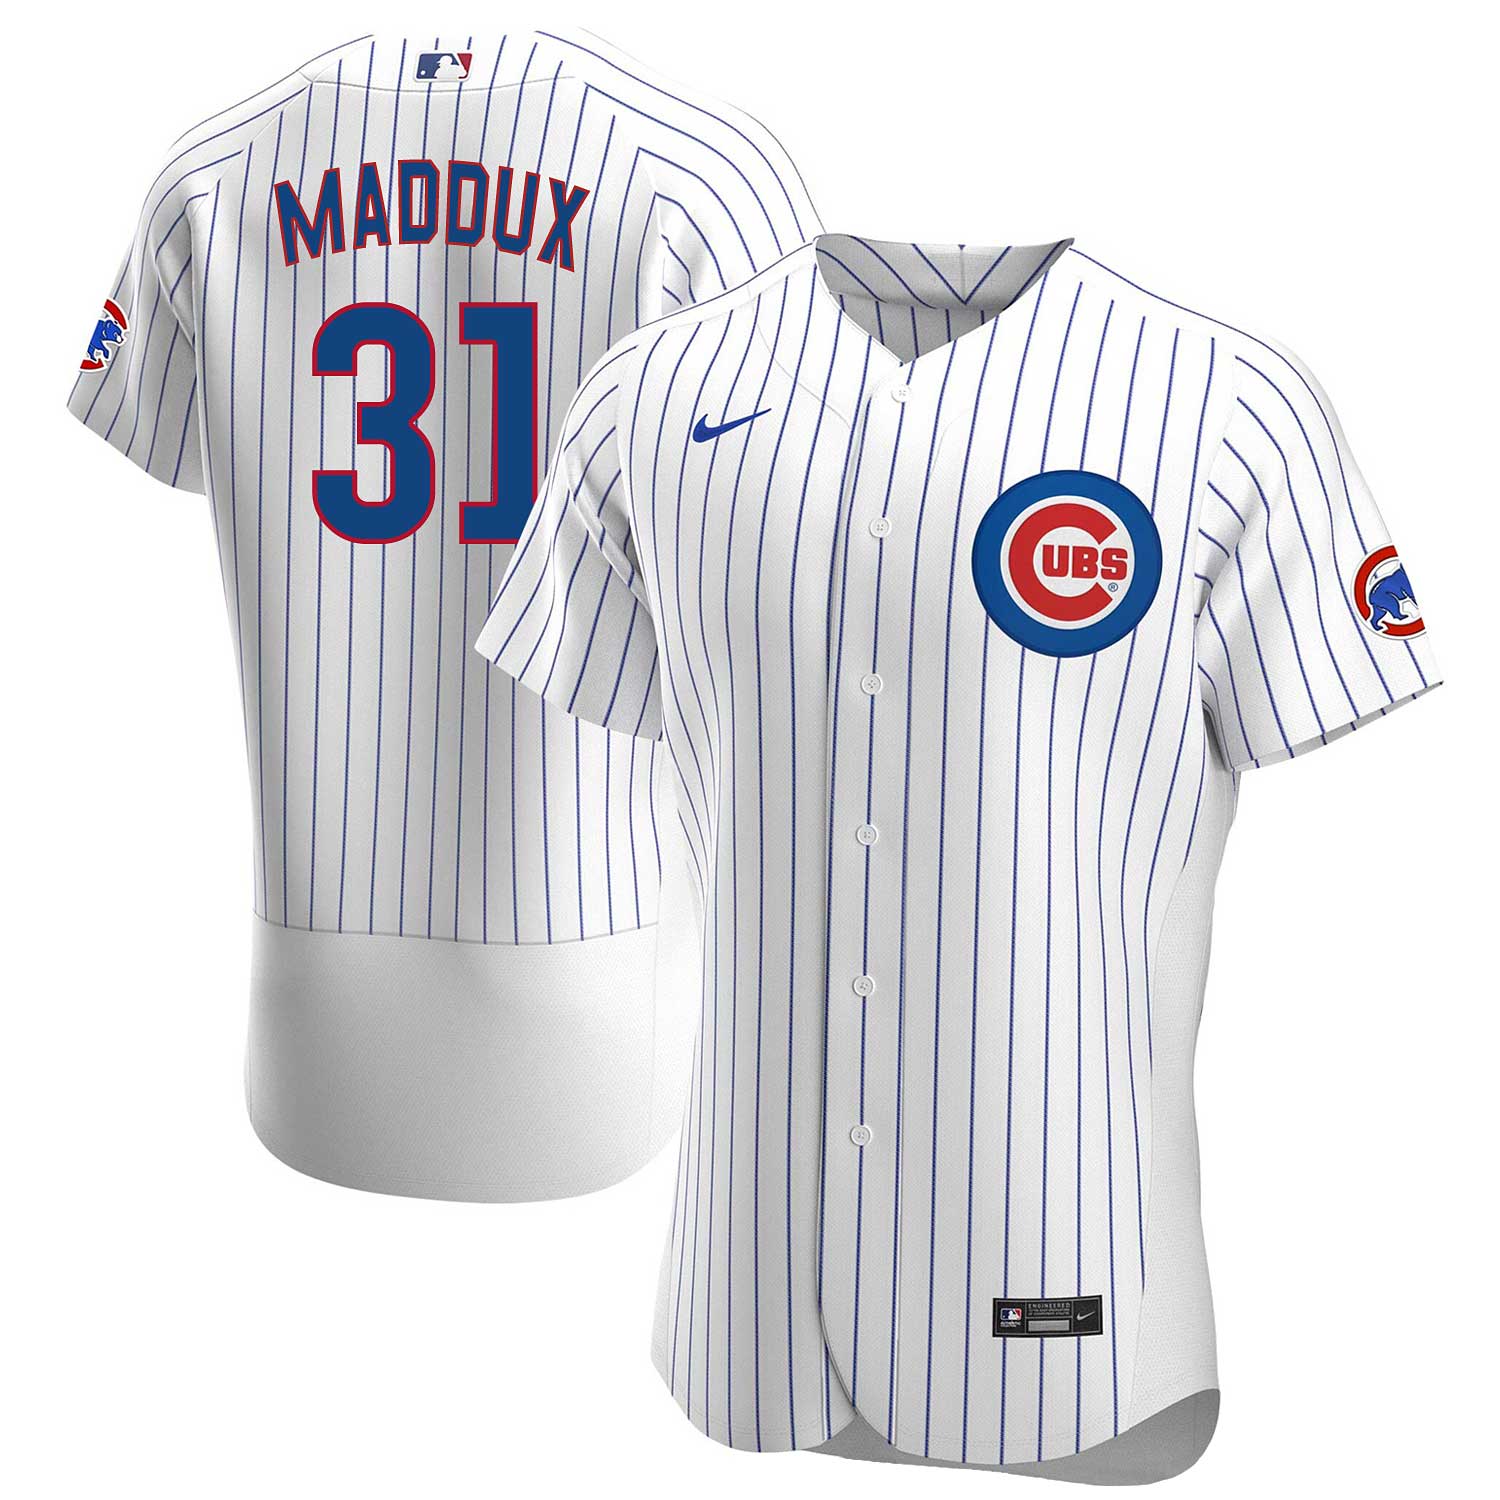 Chicago Cubs Greg Maddux Nike Home Authentic Jersey 44 = Medium / Large